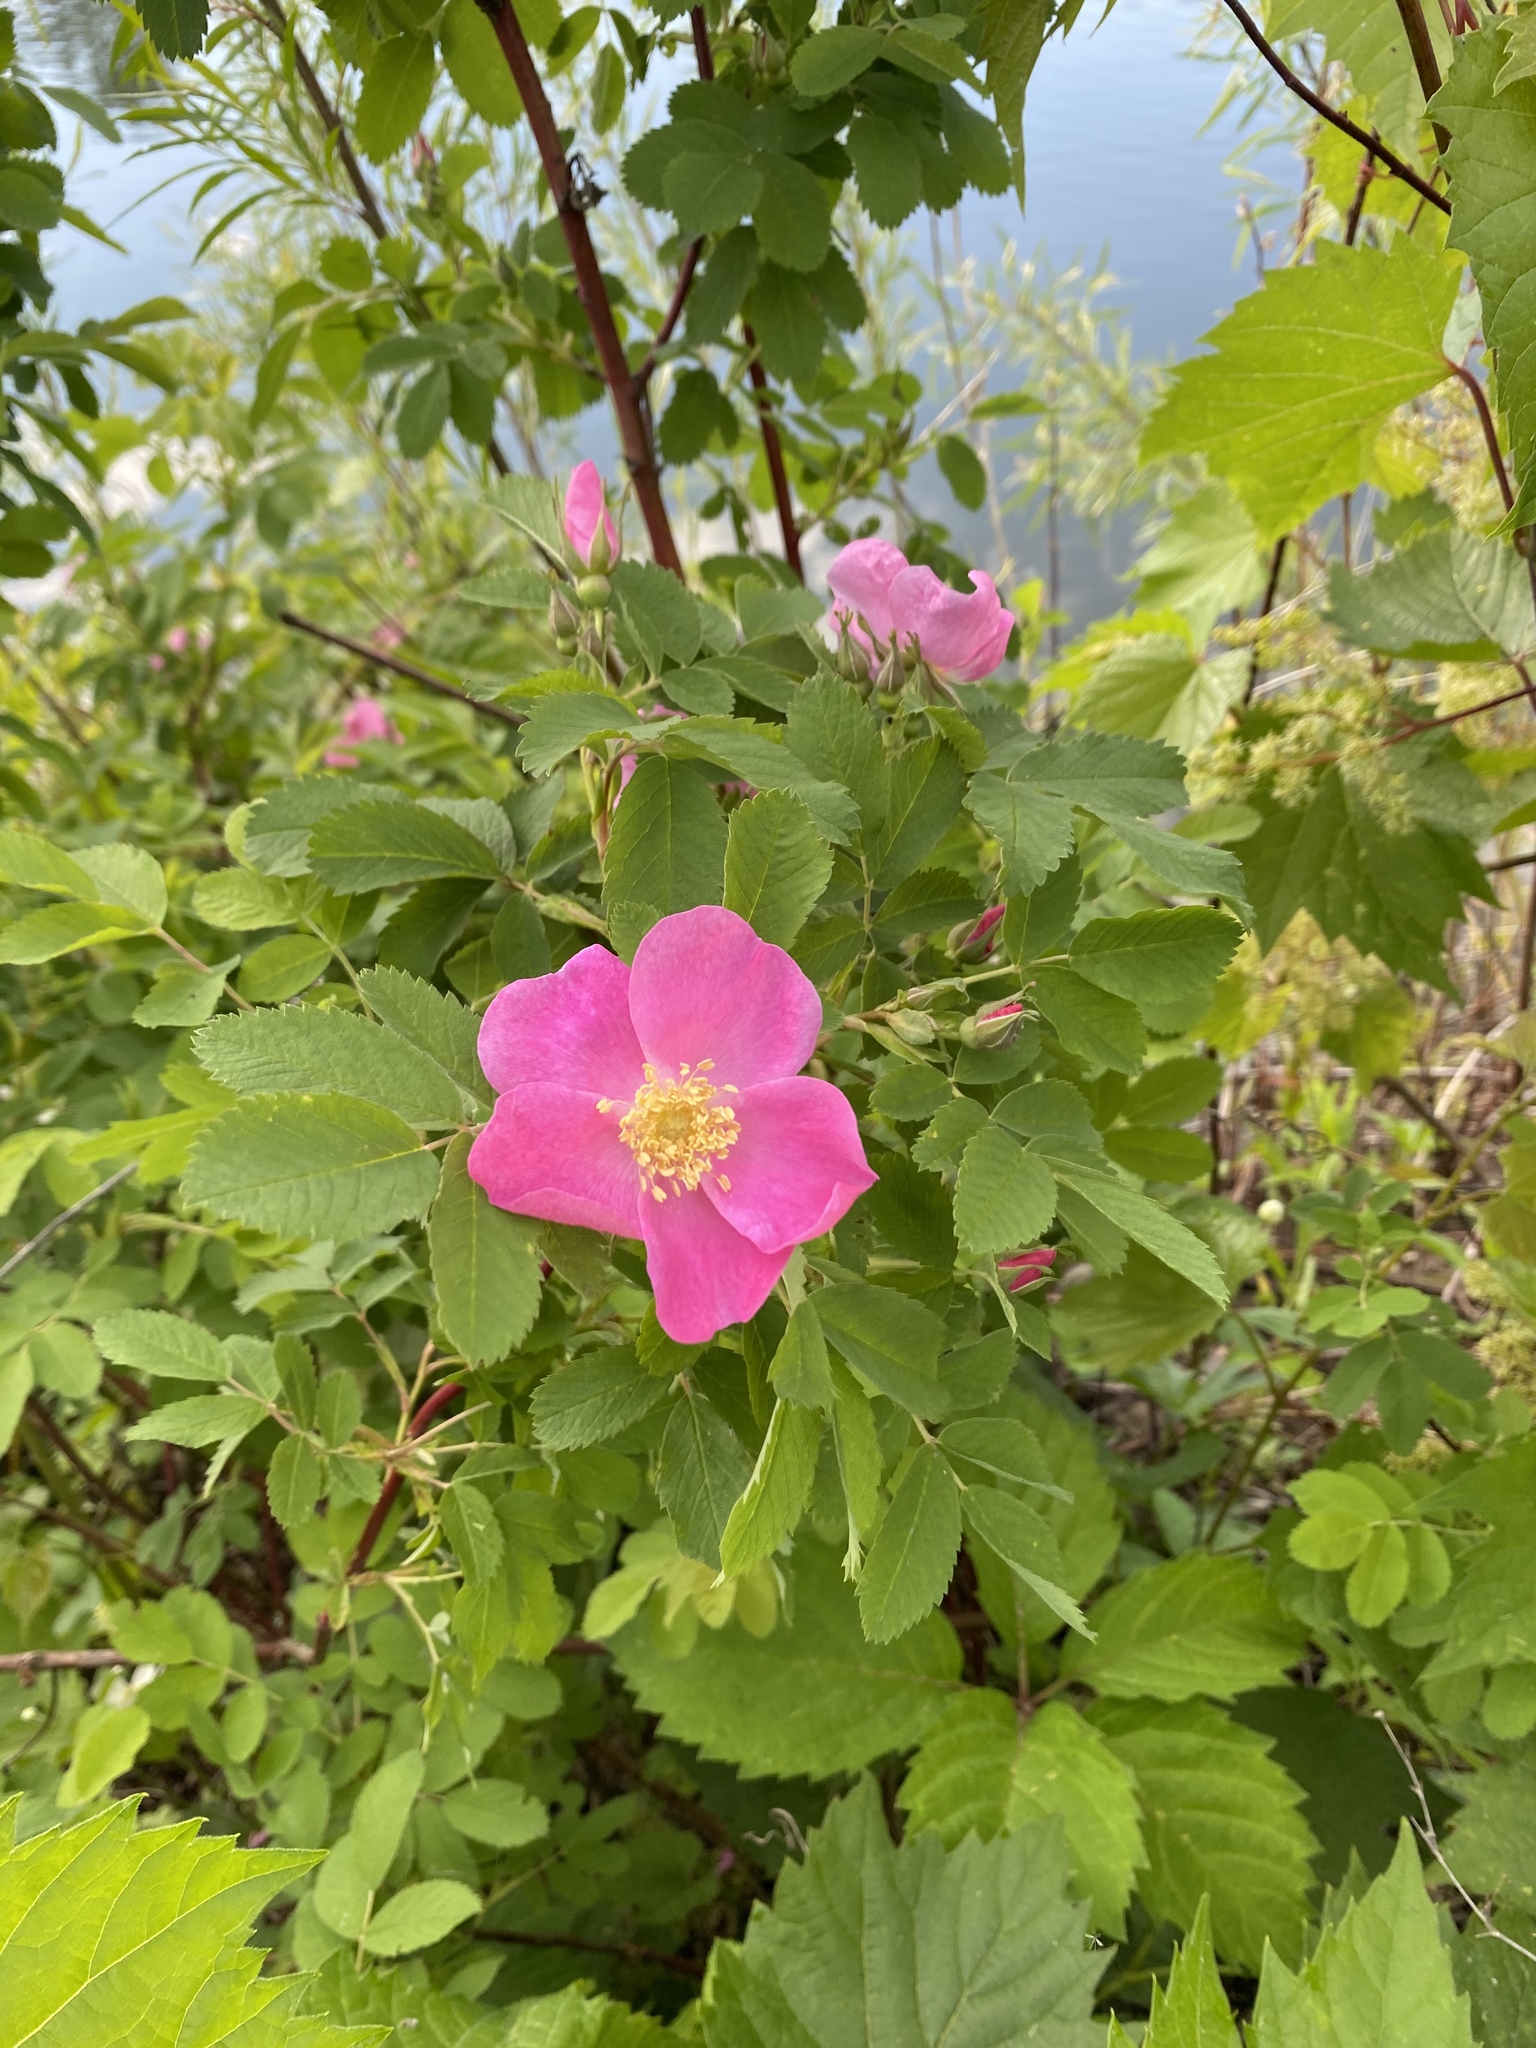 Rose flower with five bright pink petals and a yellow center. The photo captures vegetation of the understory, where the prairie rose grows.